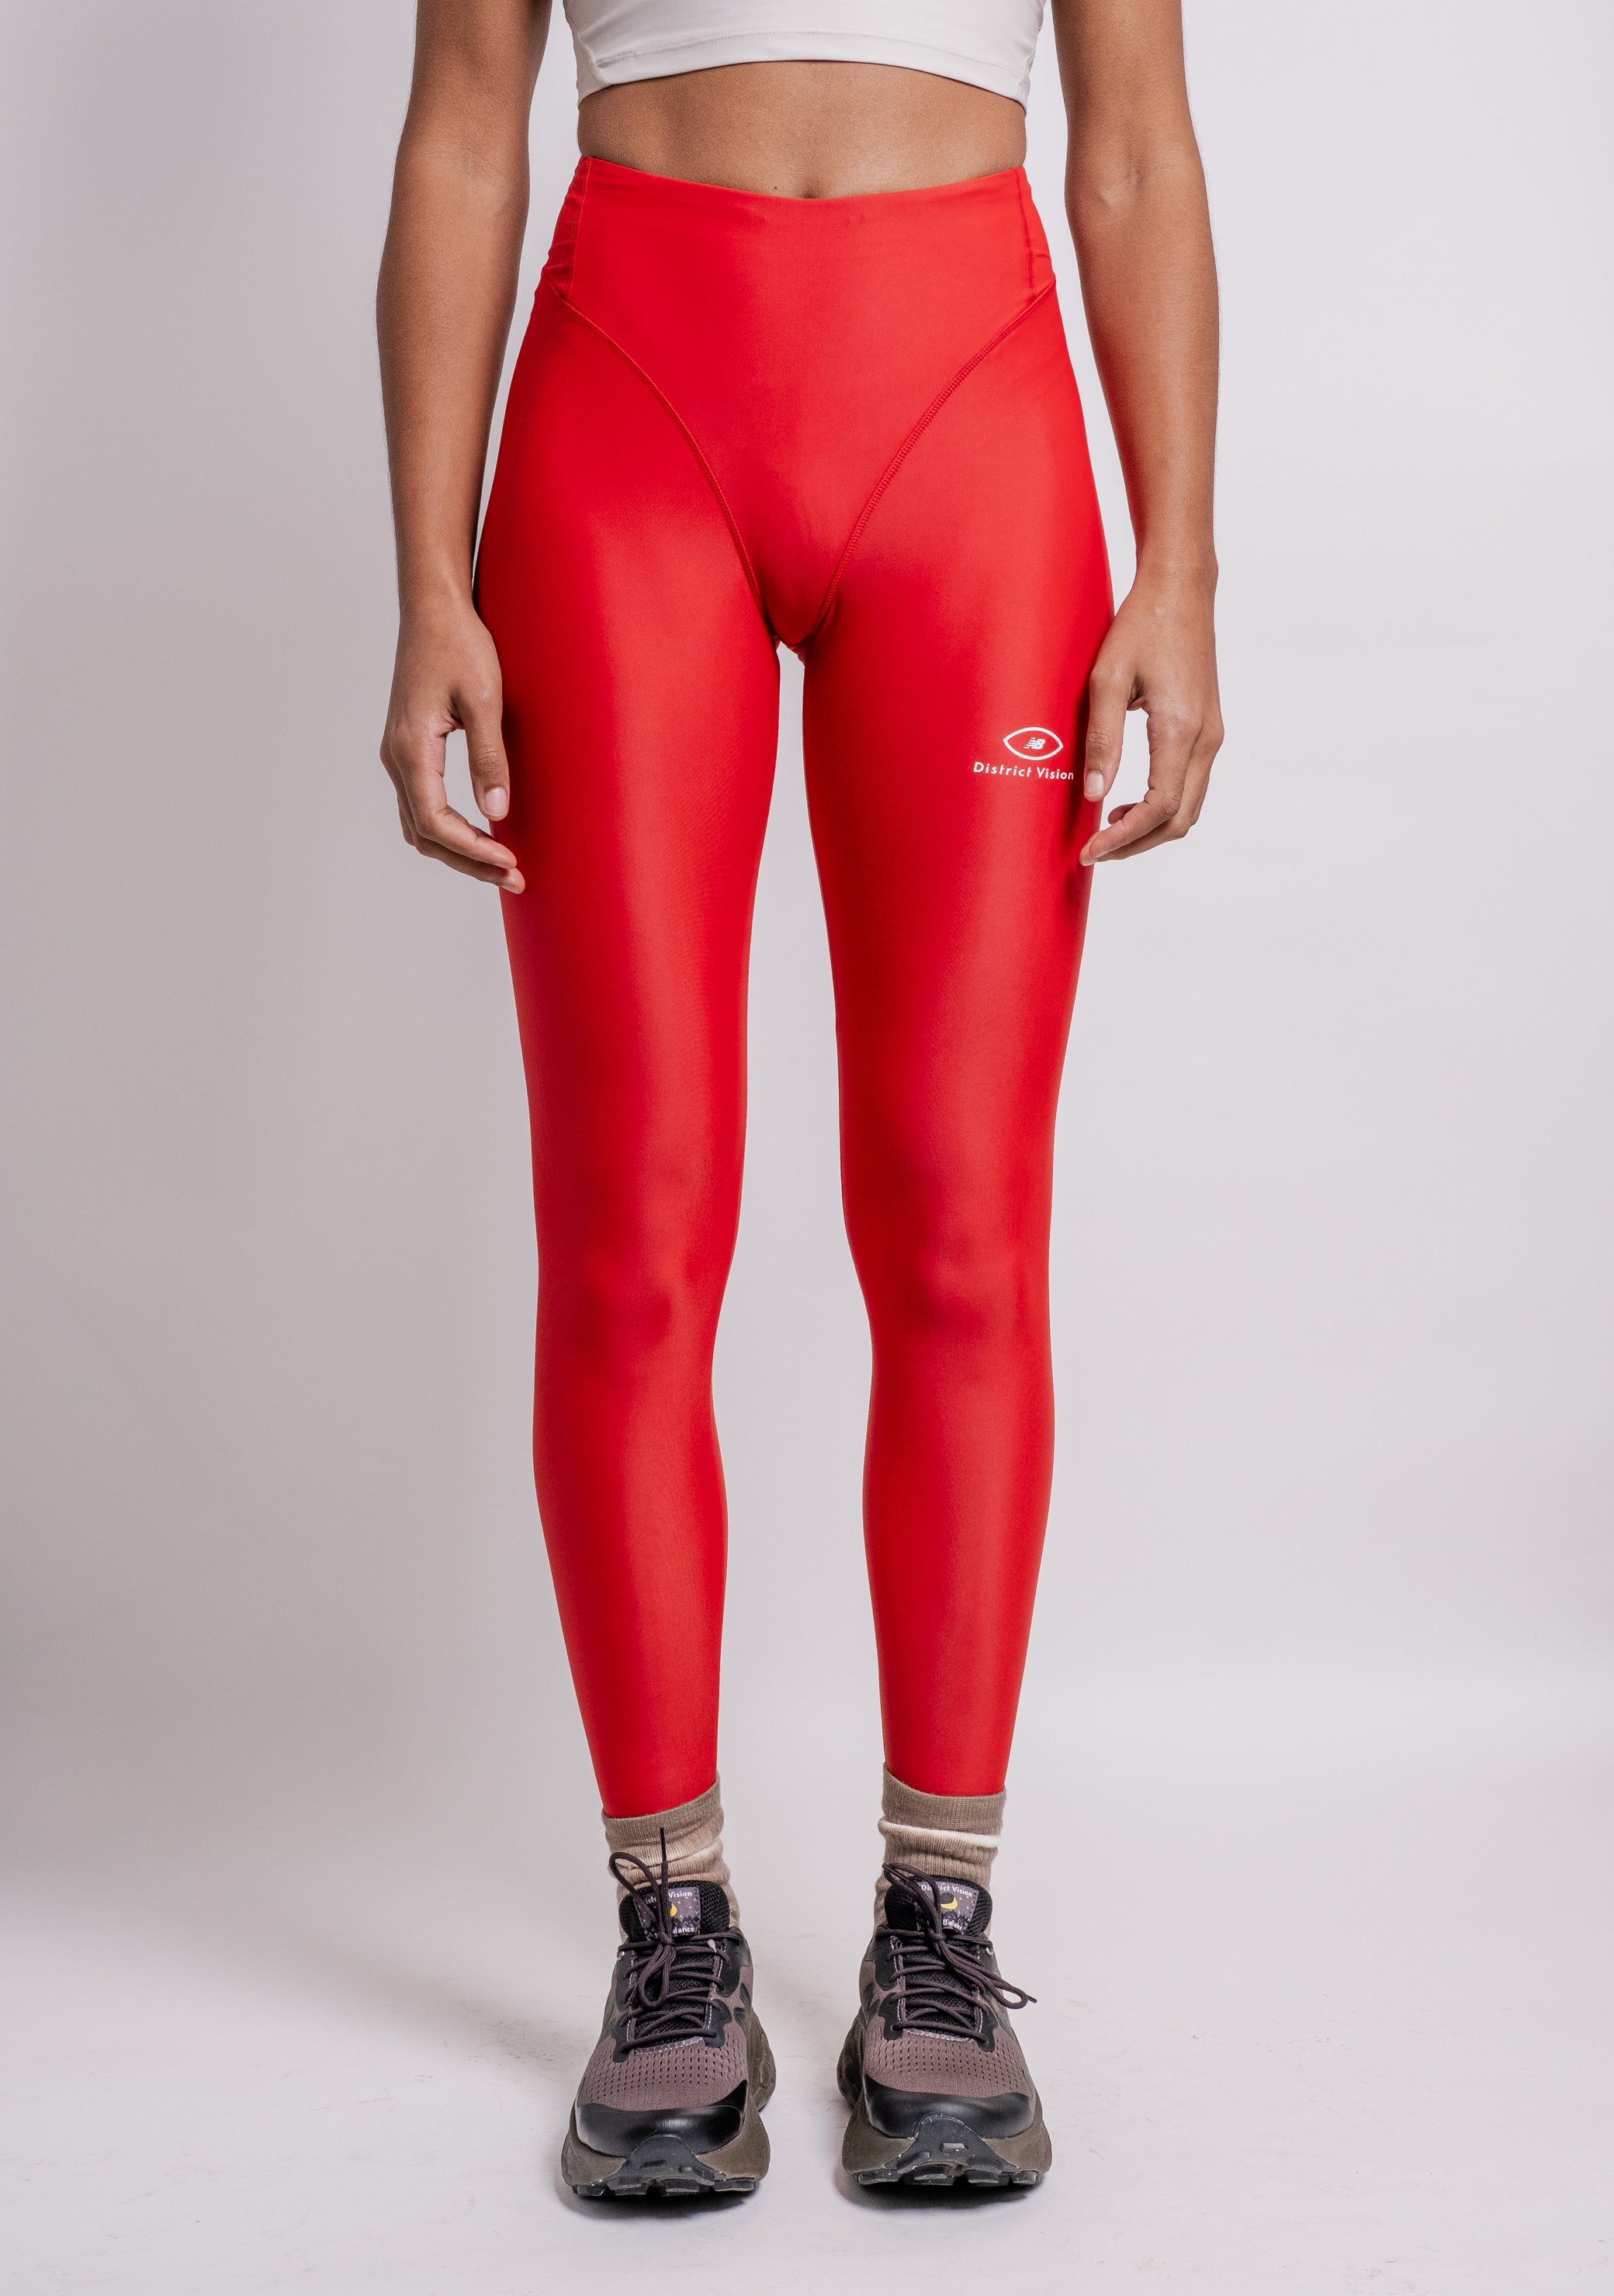 Mossimo Red Leggings for Women for sale